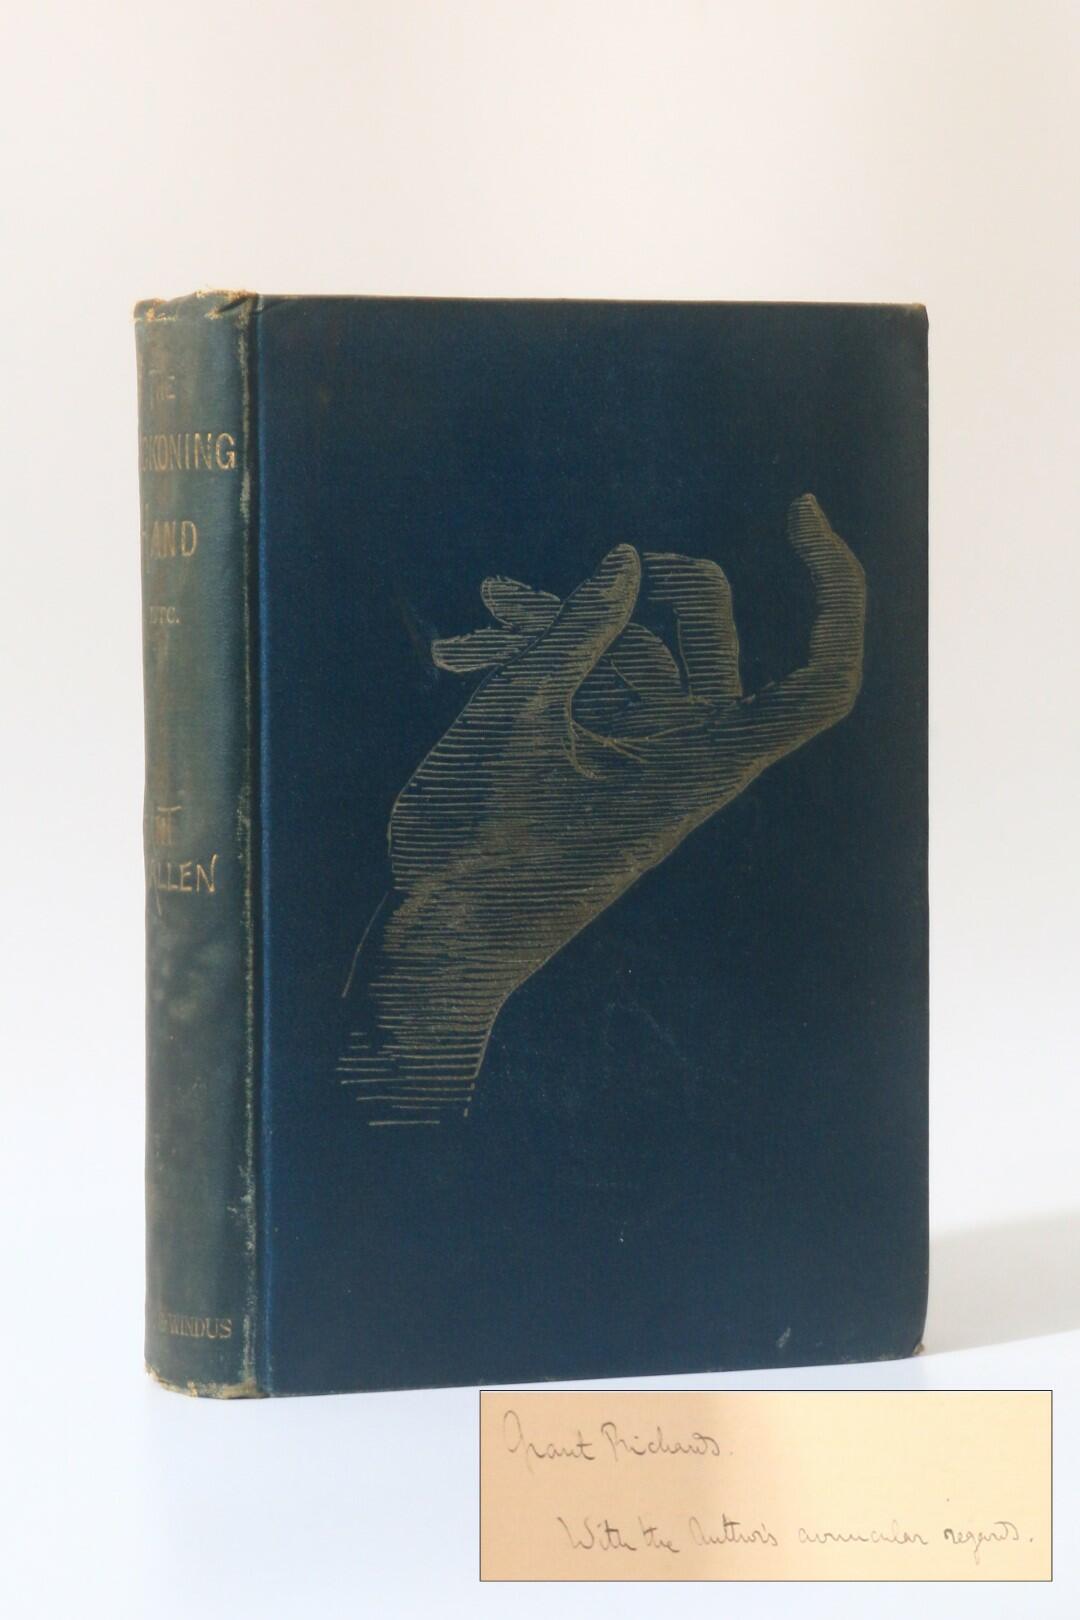 Grant Allen - The Beckoning Hand and Other Stories - Association Copy - Chatto & Windus, 1887, Signed First Edition.